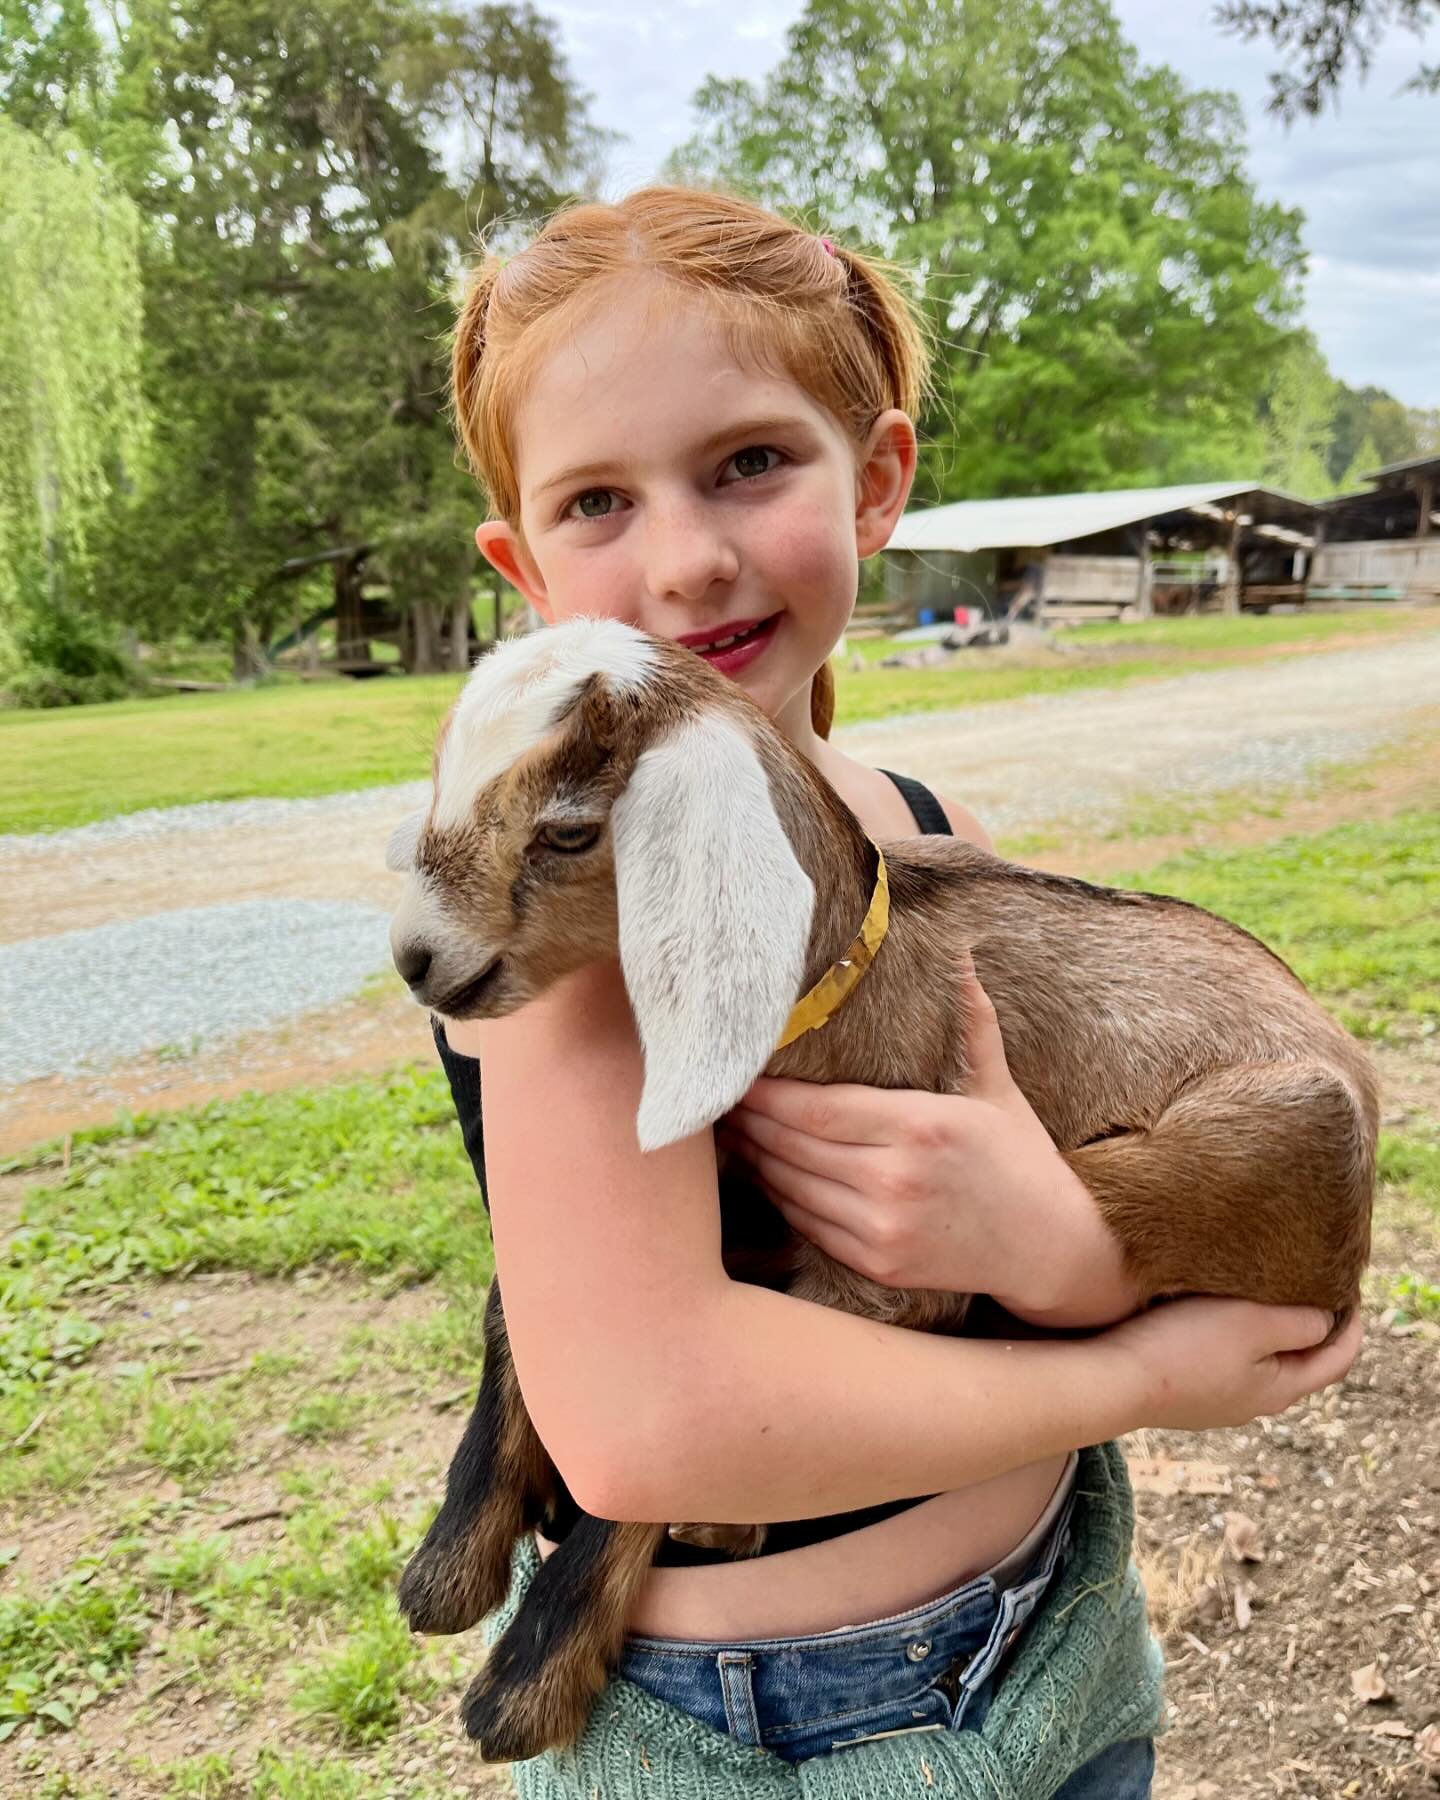 More cute pictures from the #piedmontfarmtour put on by @carolinafarms and sponsered by @weaverstreetmarket . We had such a good time and can&rsquo;t wait till next year.  #localfarm #localfood #localfoodcoop